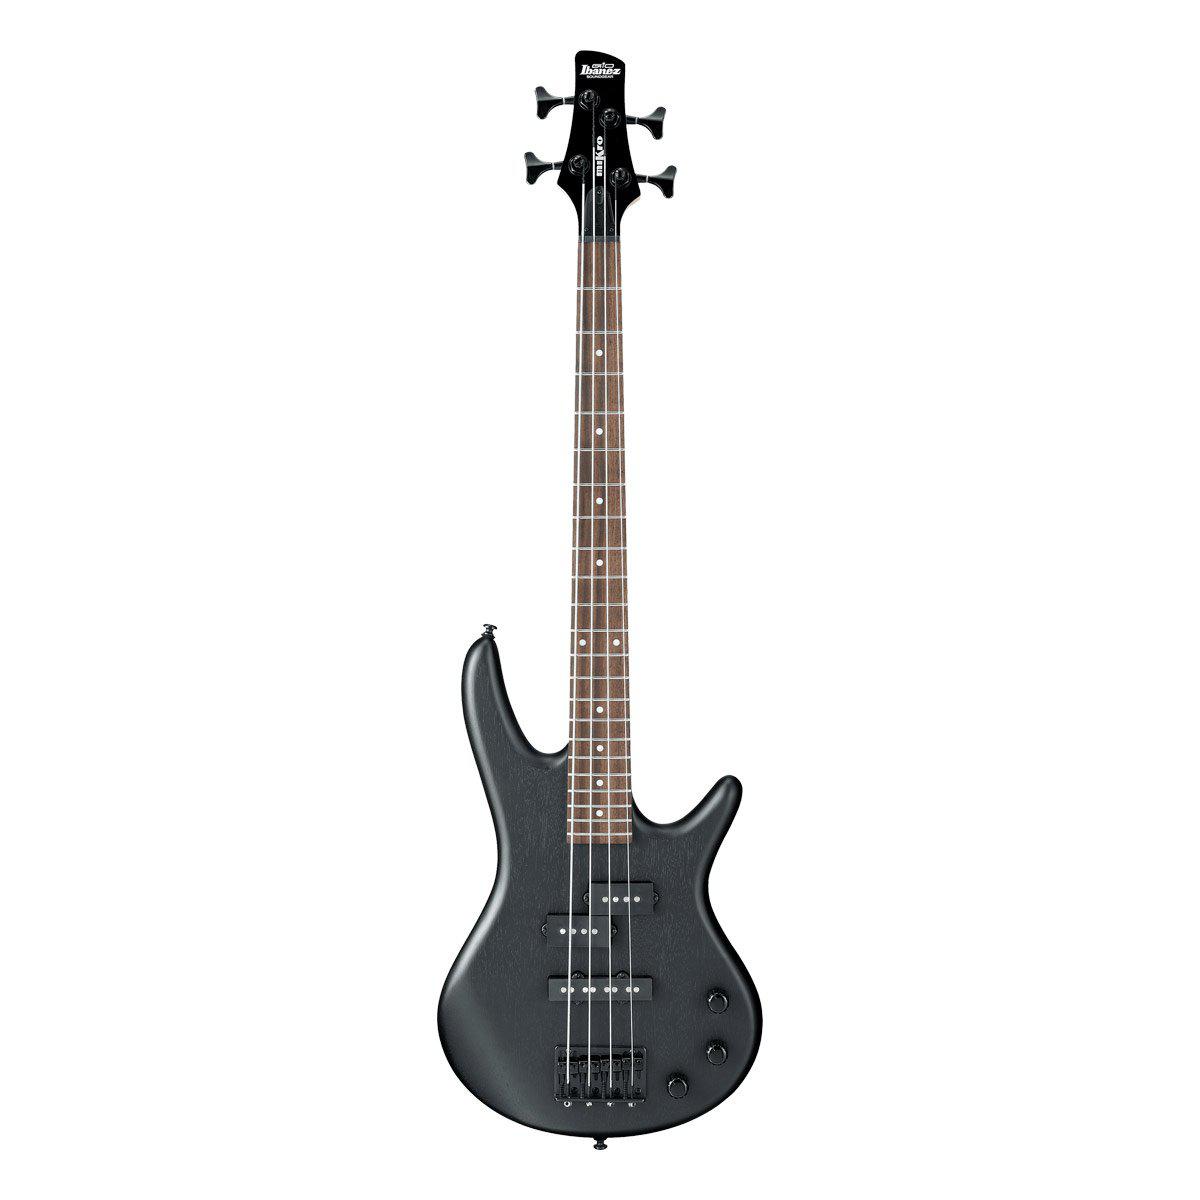 Ibanez GSRM20 Mikro Short Scale Bass Guitar-Weathered Black-Andy's Music